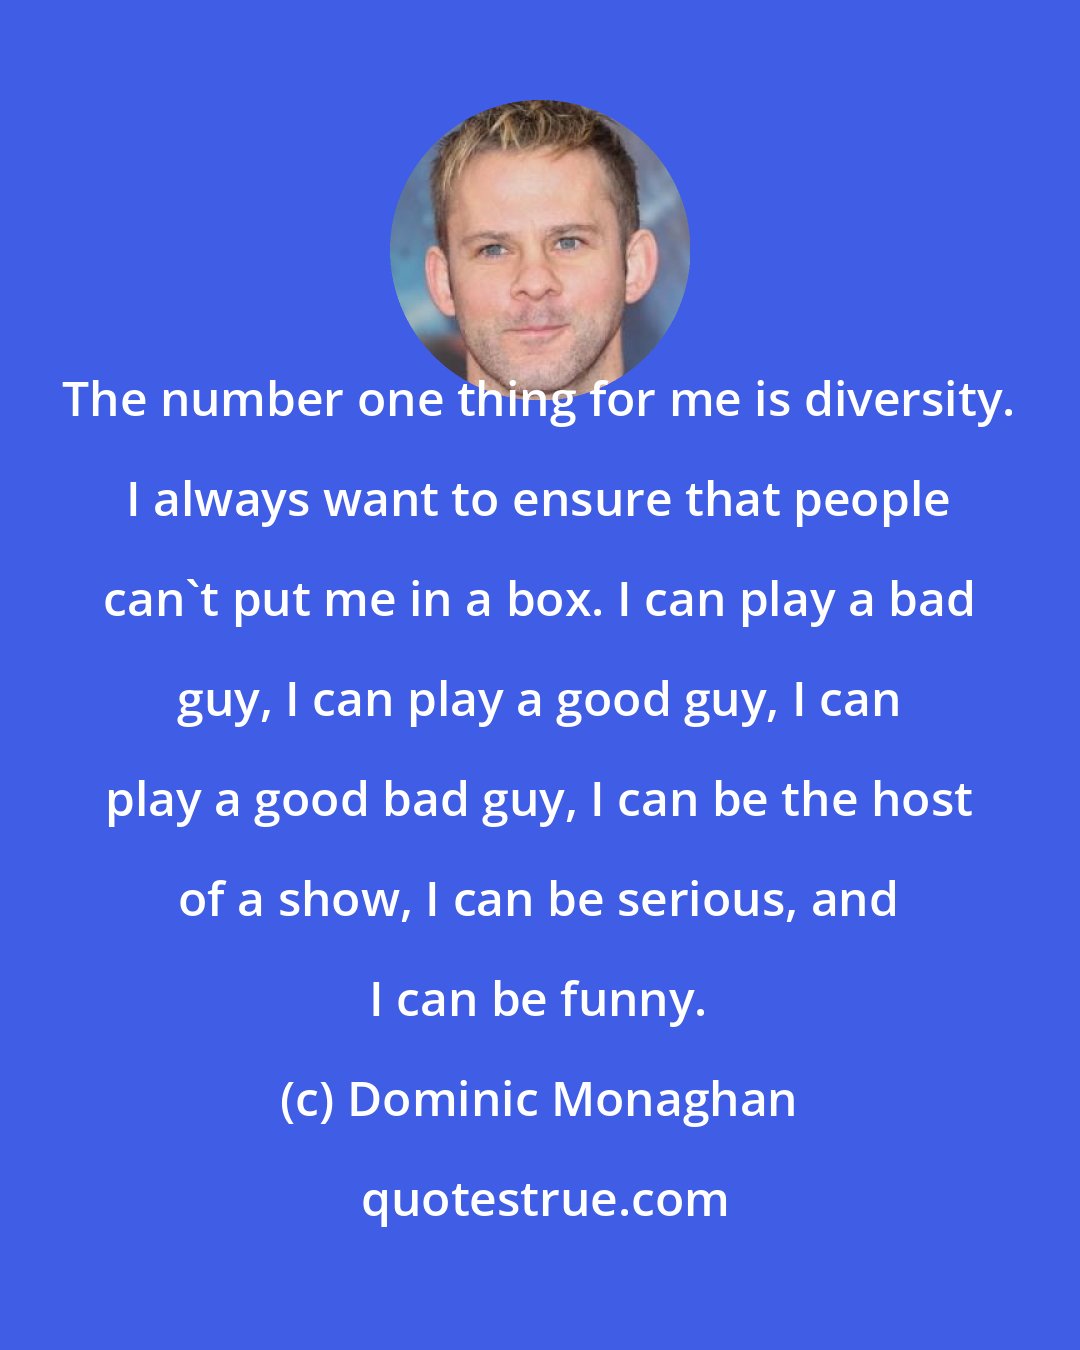 Dominic Monaghan: The number one thing for me is diversity. I always want to ensure that people can't put me in a box. I can play a bad guy, I can play a good guy, I can play a good bad guy, I can be the host of a show, I can be serious, and I can be funny.